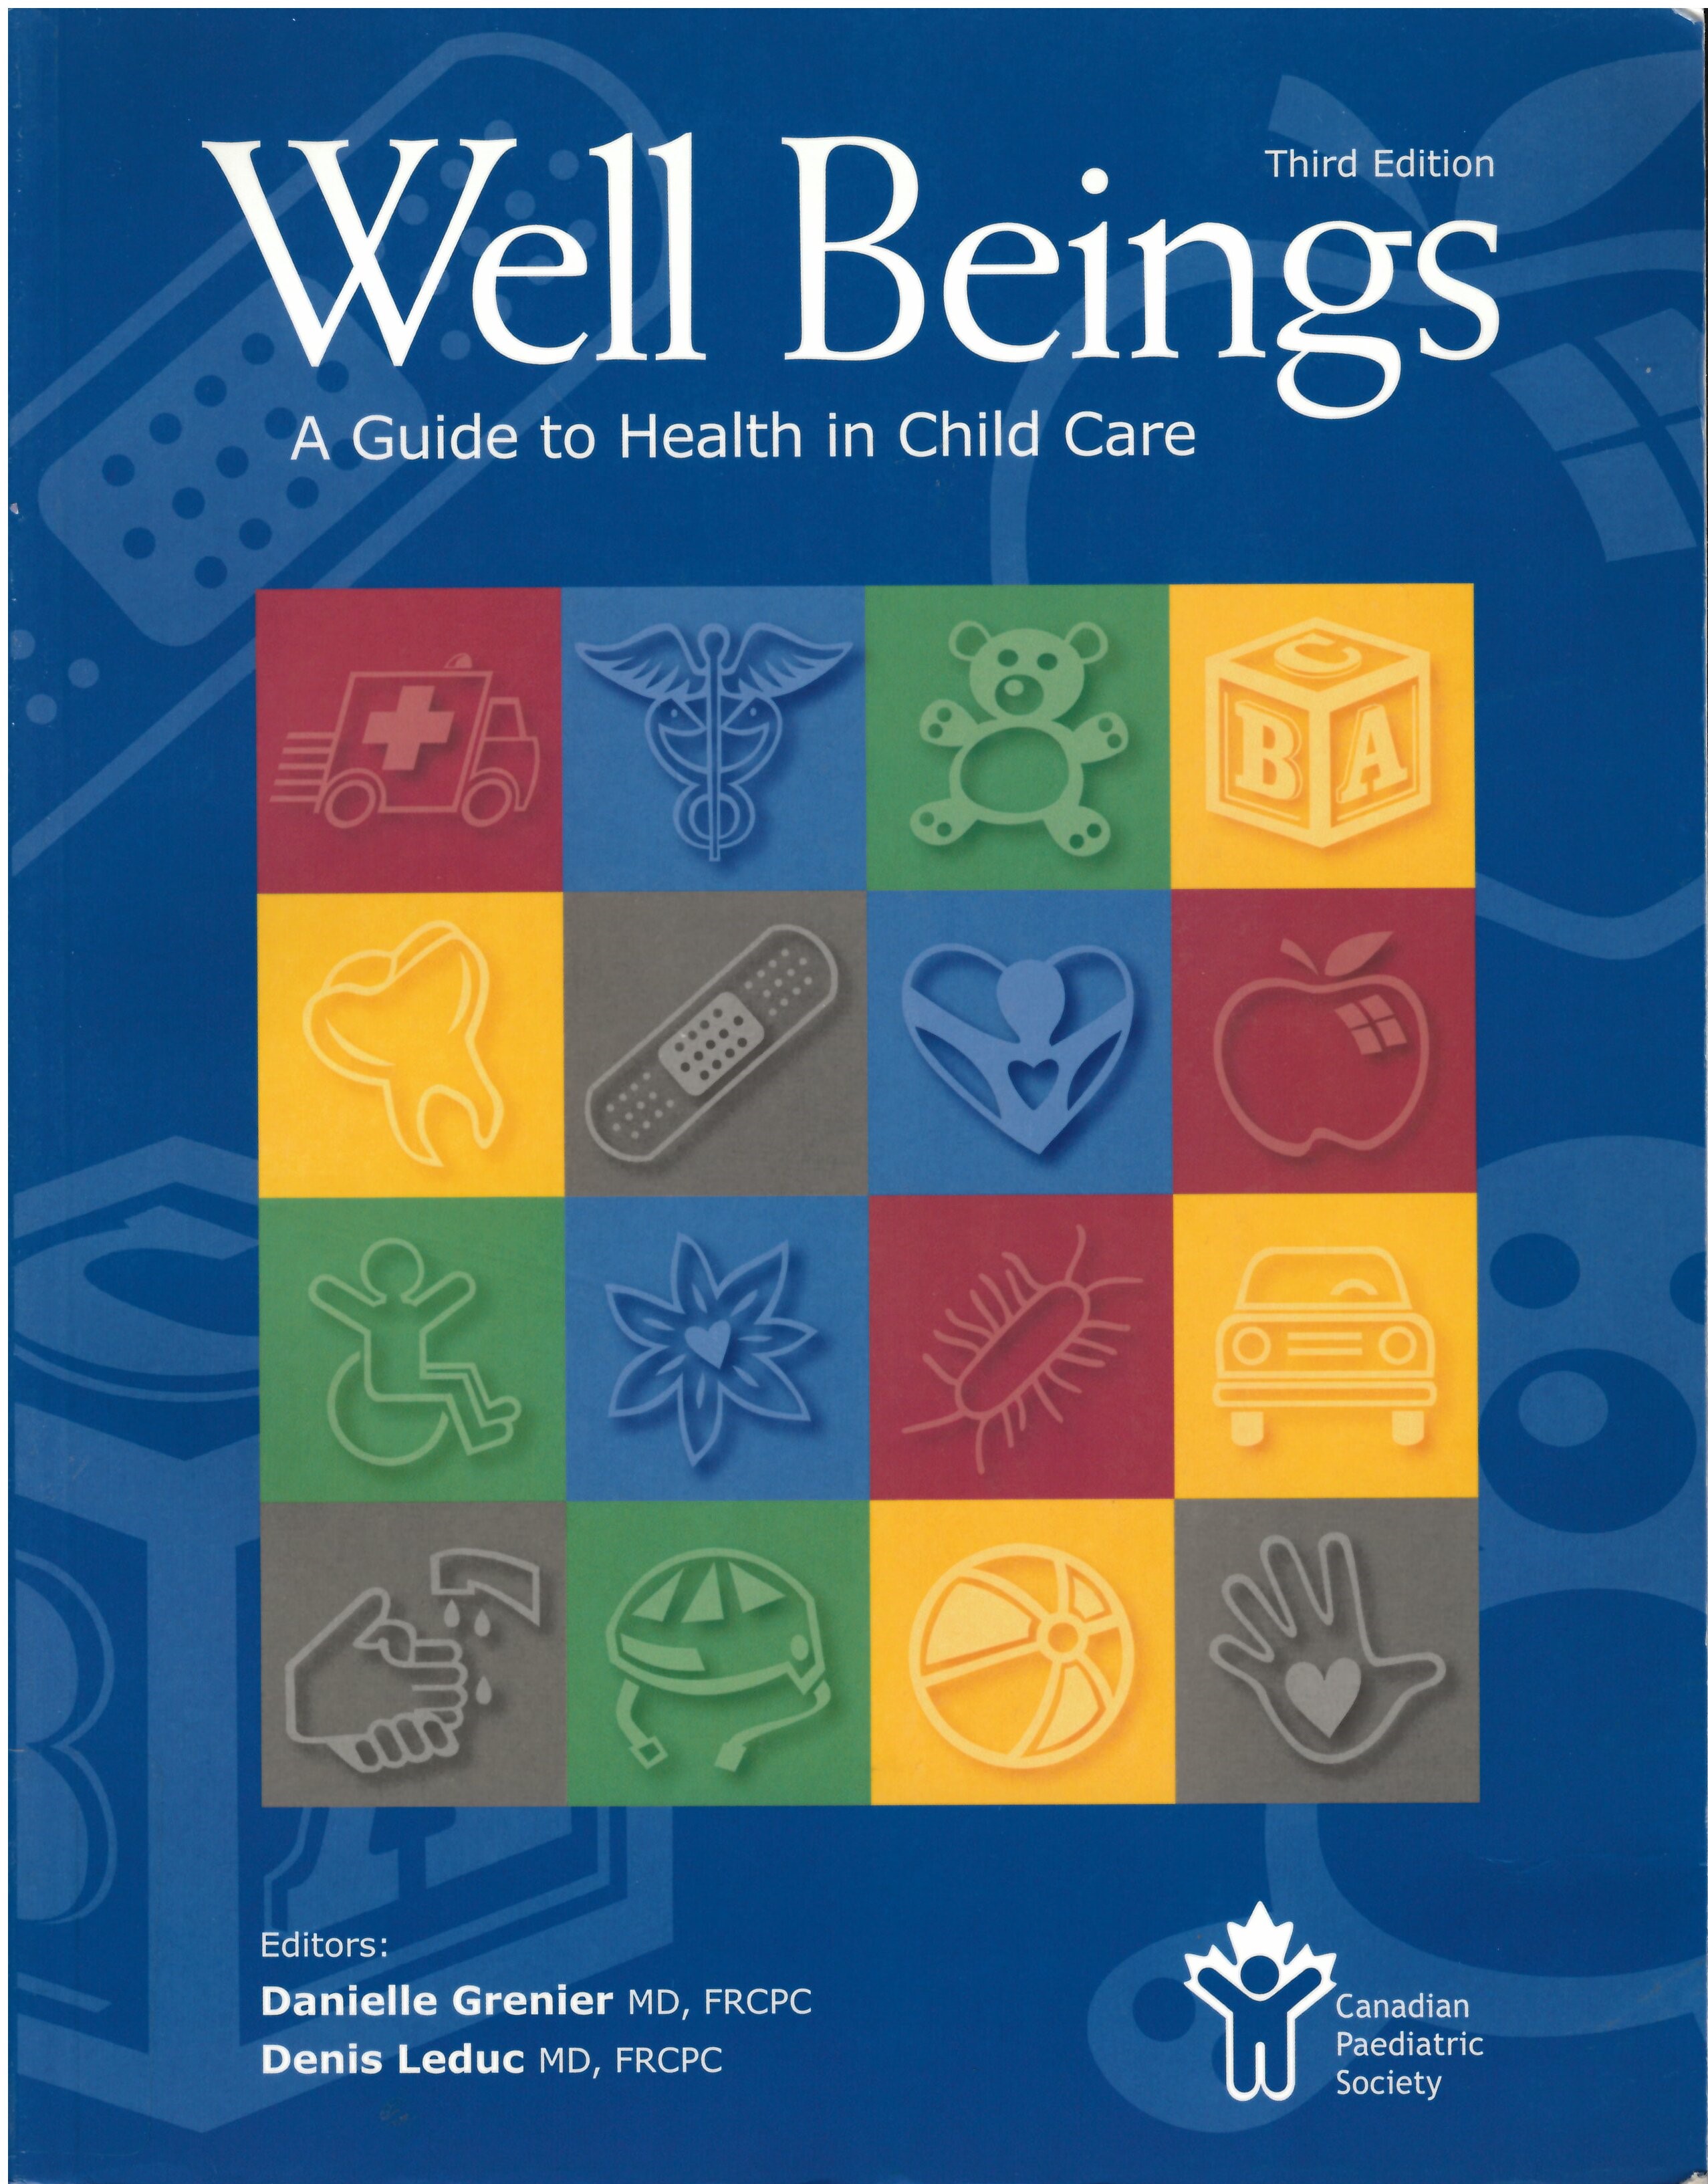 Well beings : a guide to health in child care